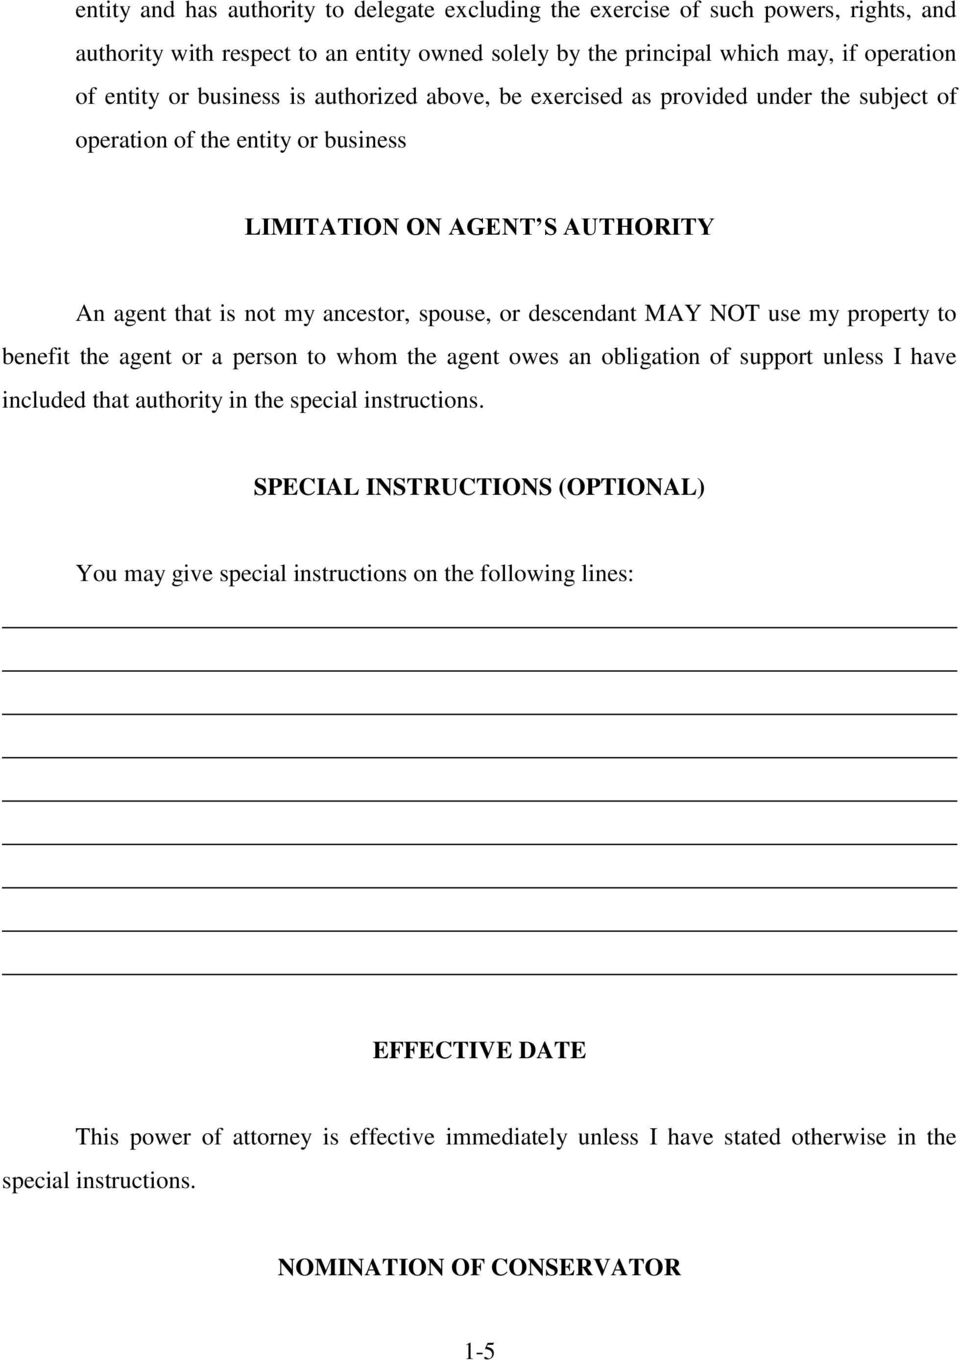 use my property to benefit the agent or a person to whom the agent owes an obligation of support unless I have included that authority in the special instructions.